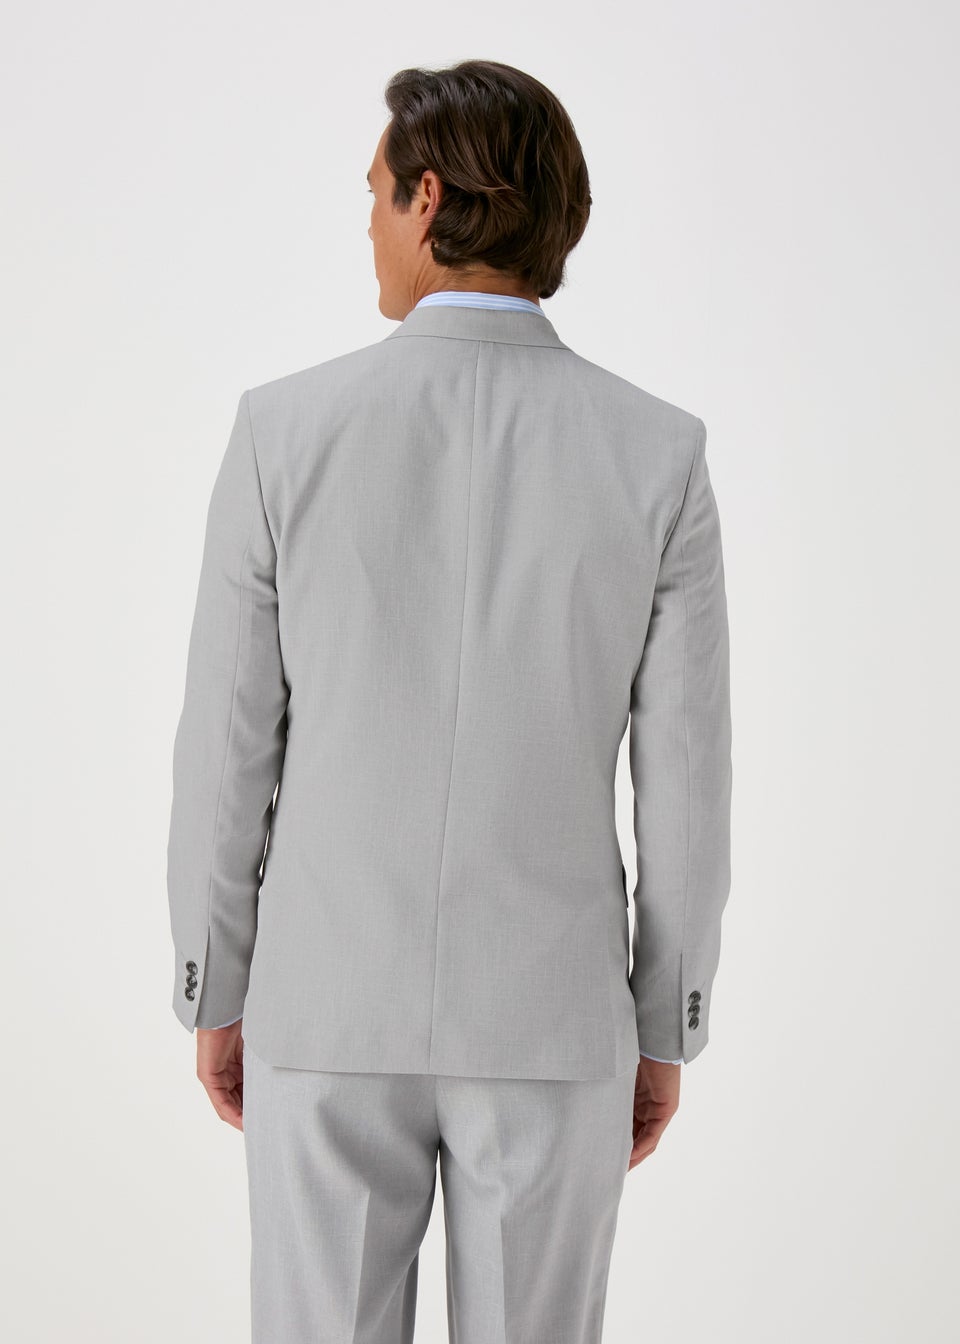 Taylor & Wright Grey Turner Double Breasted Slim Fit Jacket